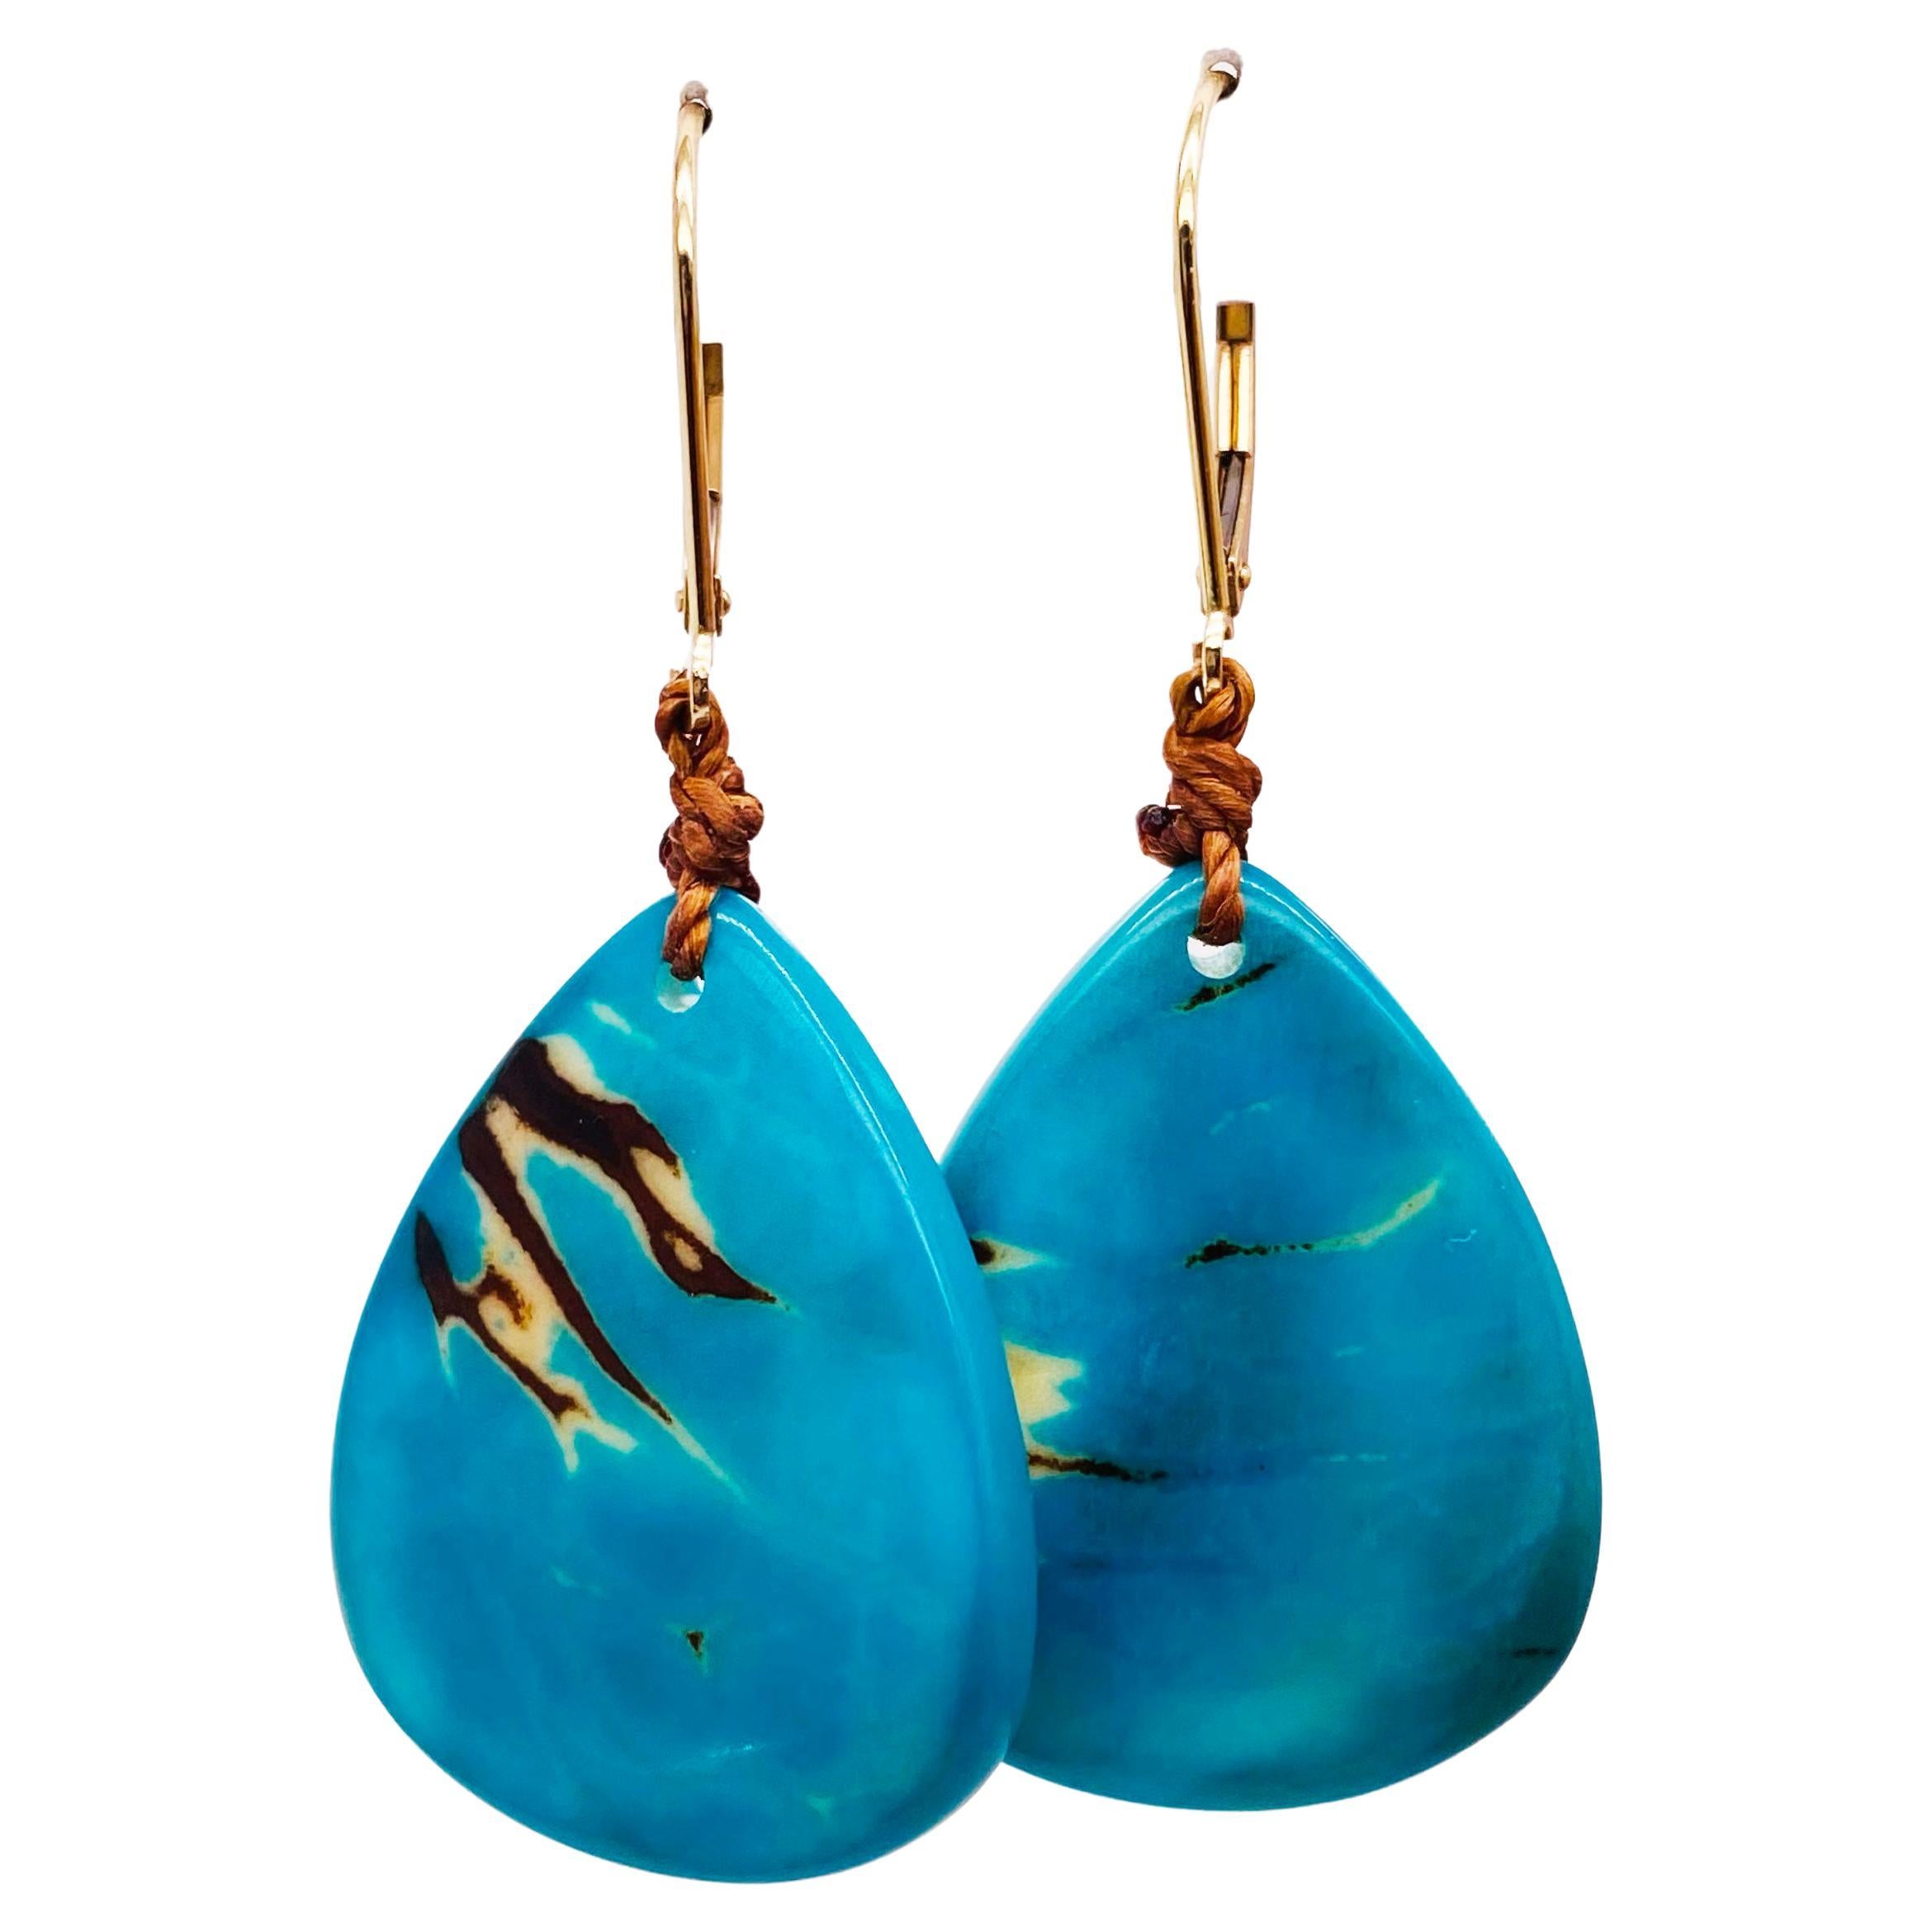 Palm Tree Nut Dangle Earrings in 14k Yellow Gold, Turquoise Nut from Rainforest